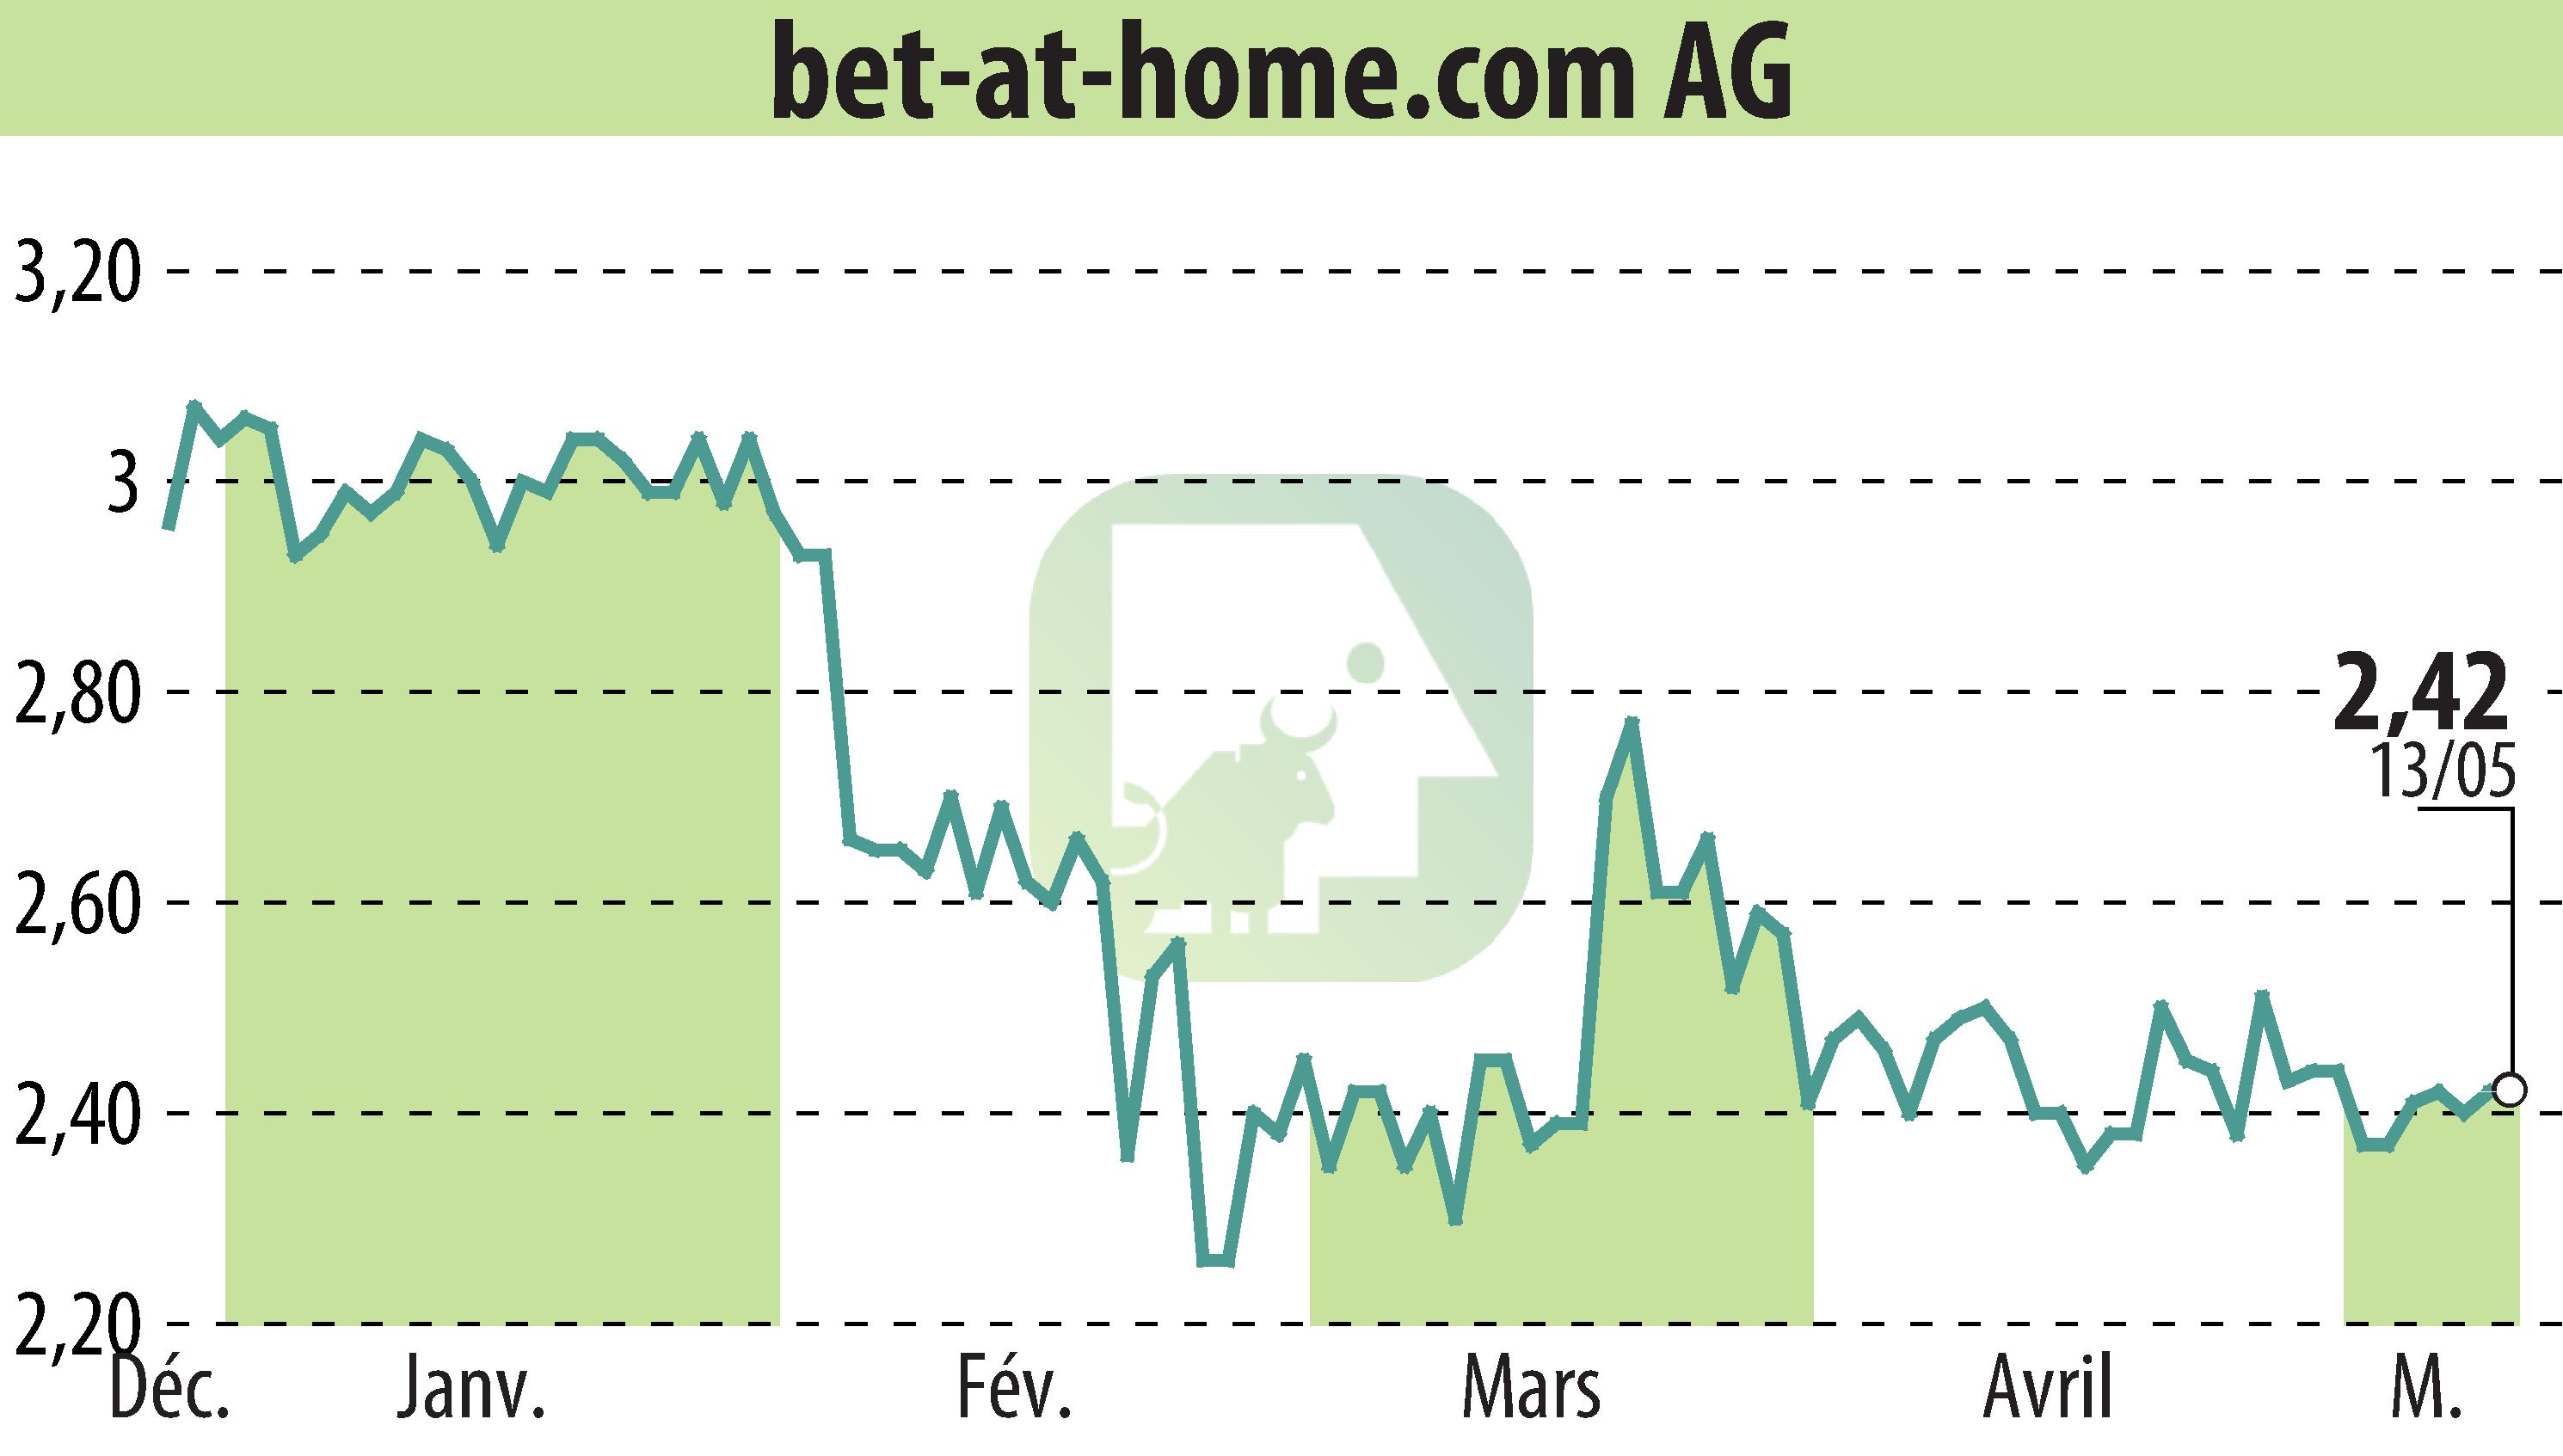 Stock price chart of Bet-at-home.com AG (EBR:ACX) showing fluctuations.